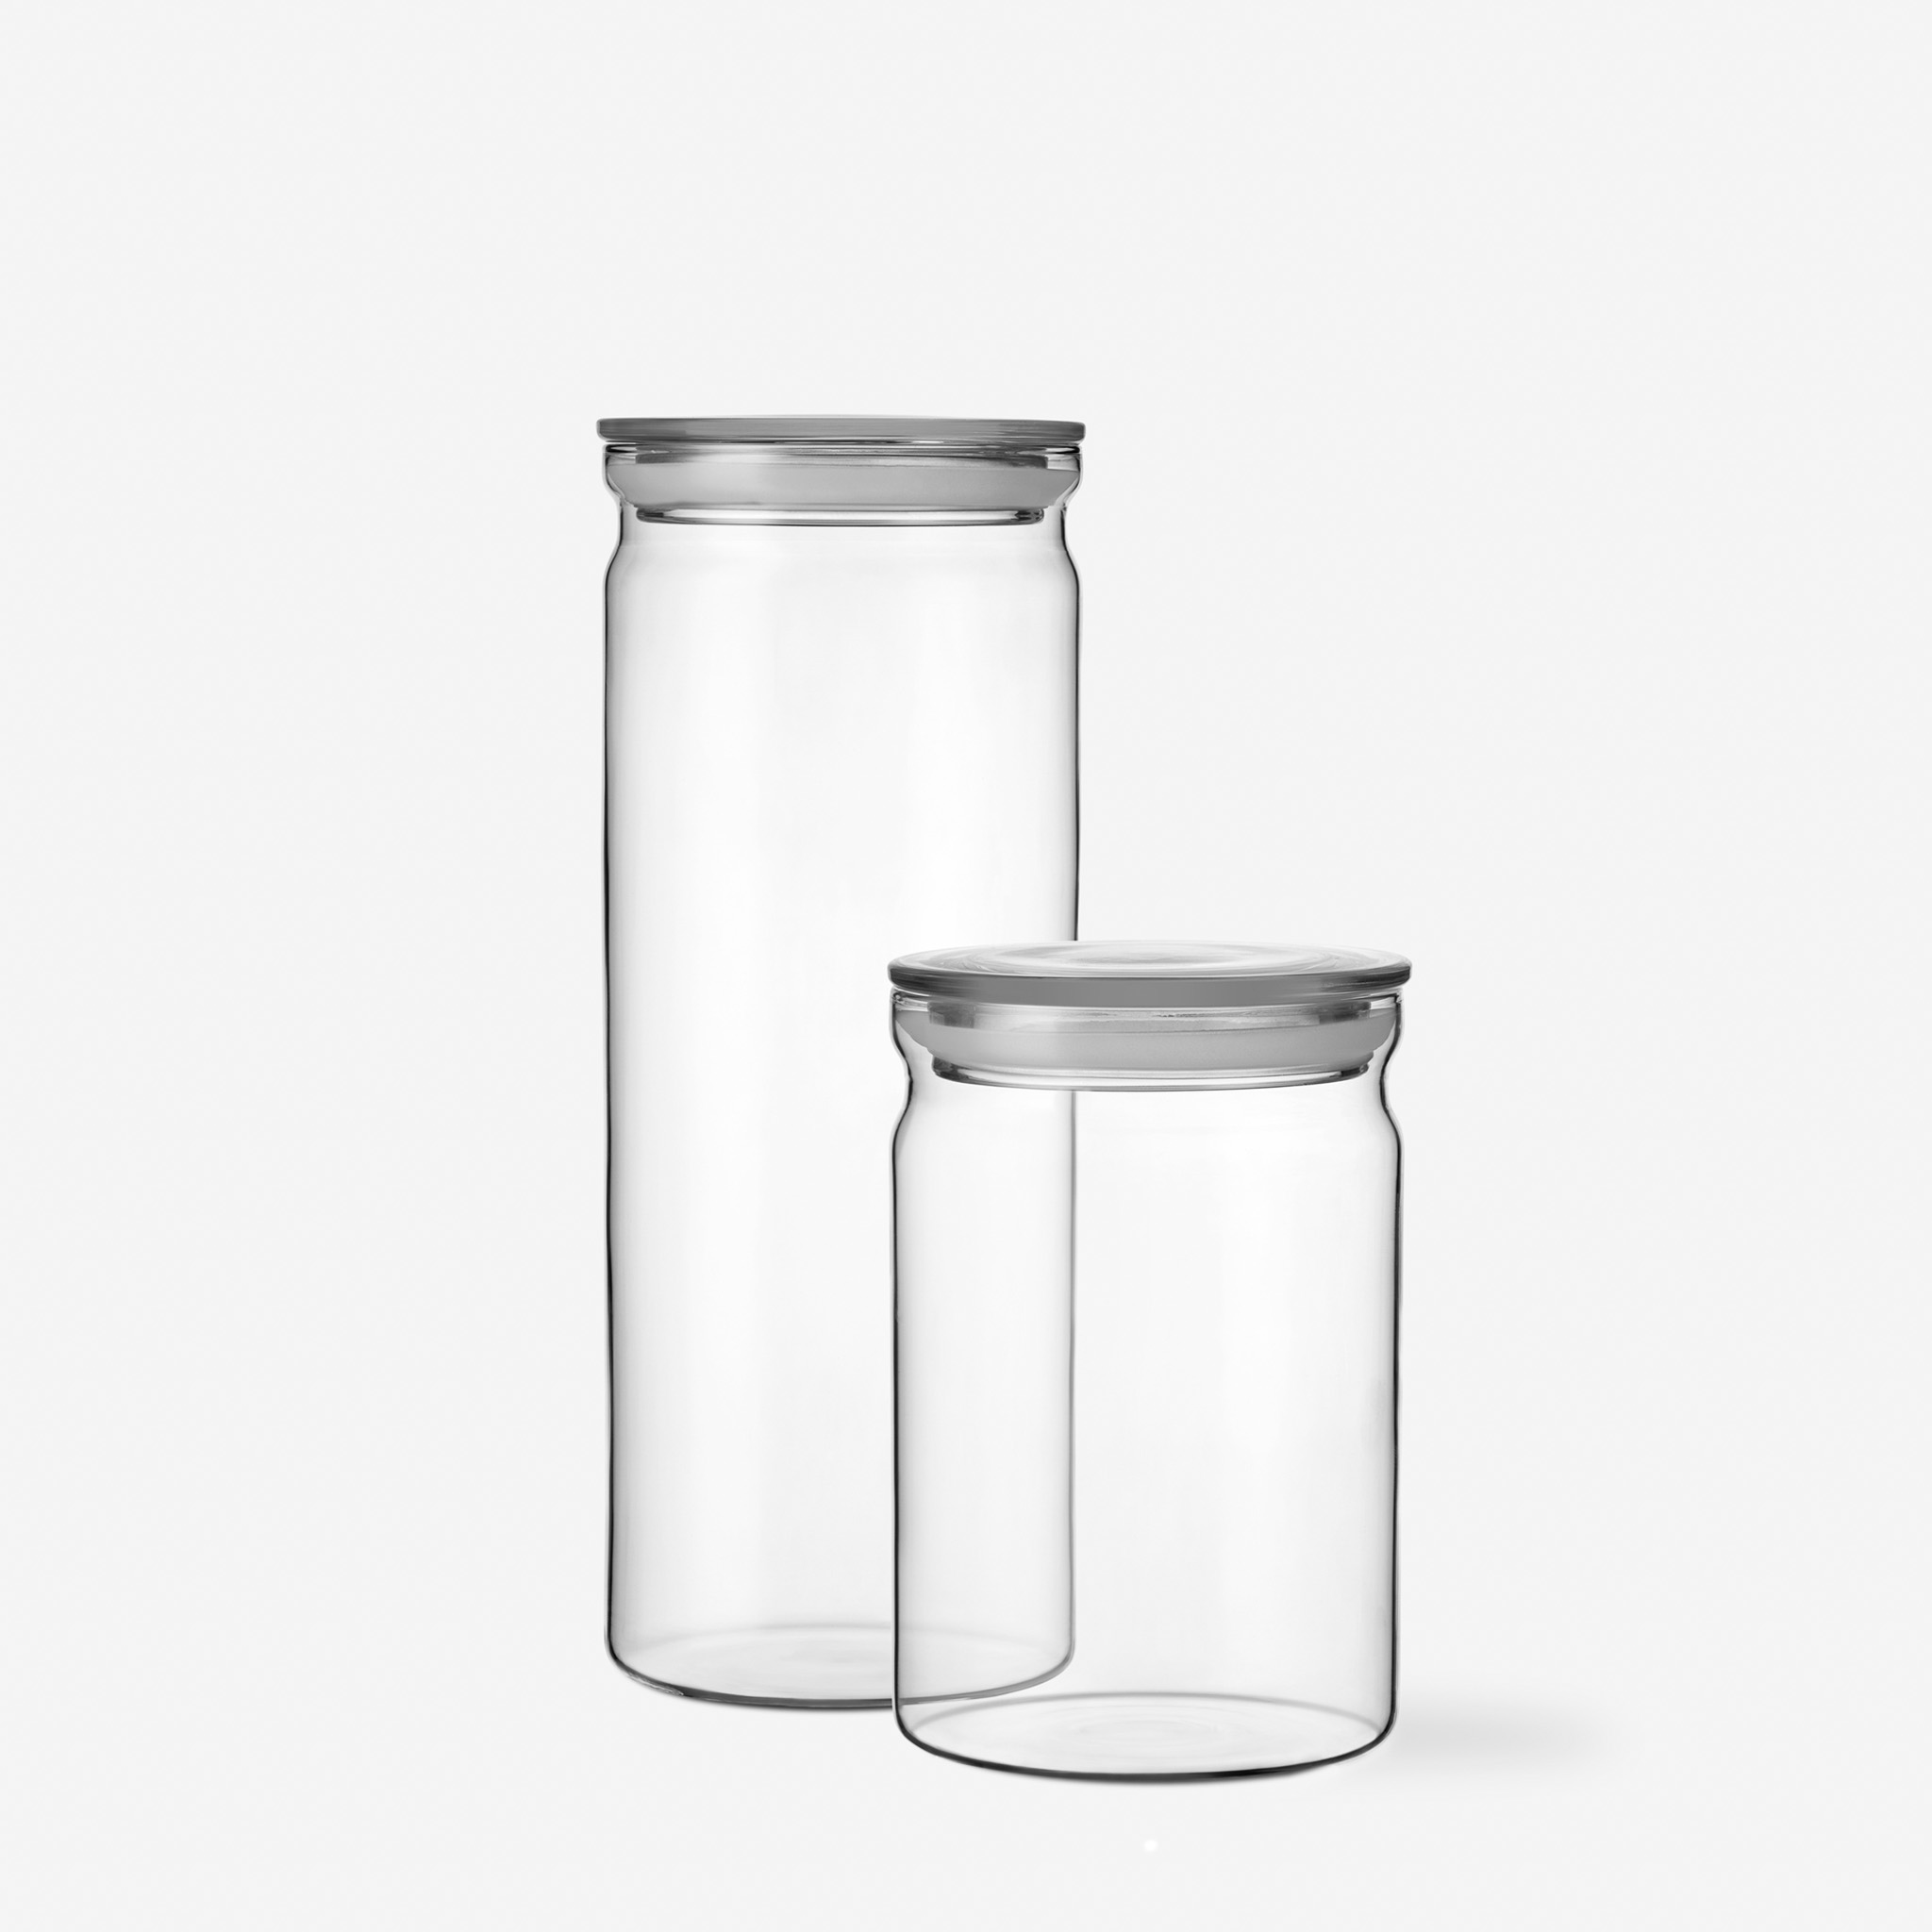 VIPP253 // GLASS CANISTER - 0.9 L